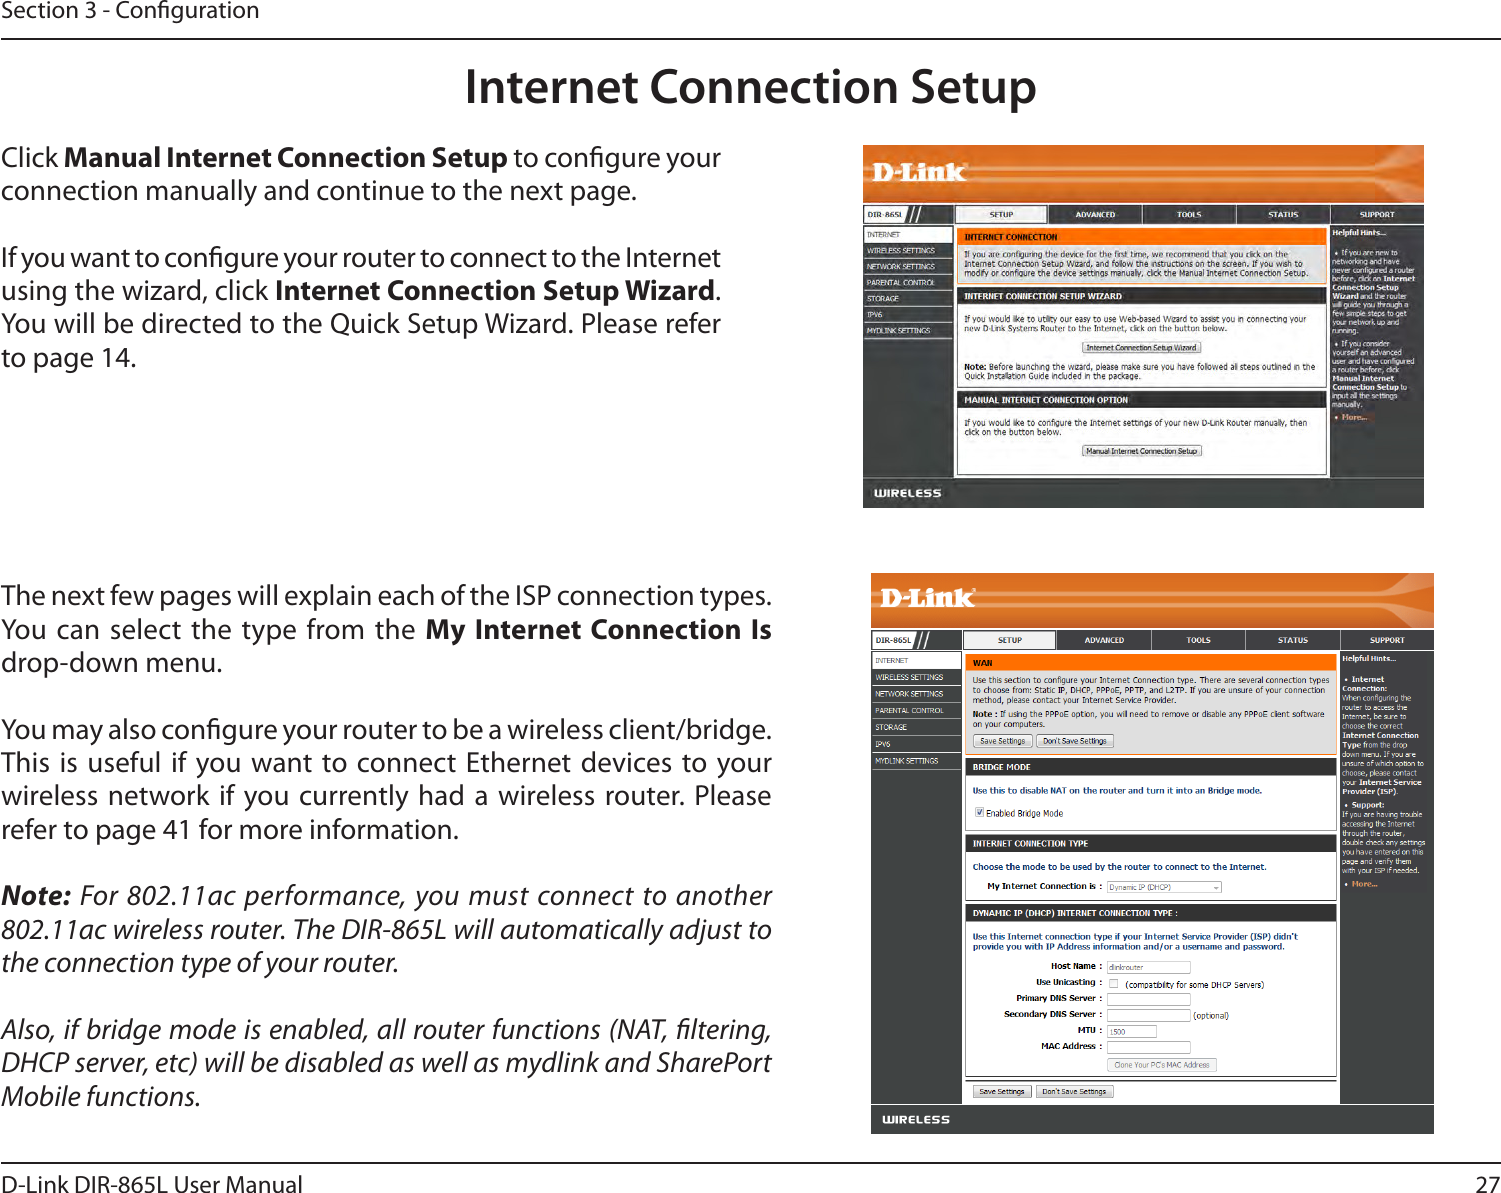 27D-Link DIR-865L User ManualSection 3 - CongurationInternet Connection SetupClick Manual Internet Connection Setup to congure your connection manually and continue to the next page.If you want to congure your router to connect to the Internet using the wizard, click Internet Connection Setup Wizard. You will be directed to the Quick Setup Wizard. Please refer to page 14.The next few pages will explain each of the ISP connection types. You can  select  the type from the  My Internet Connection Is drop-down menu.You may also congure your router to be a wireless client/bridge. This is useful if  you want to connect Ethernet devices to your wireless network if you currently had a wireless router. Please refer to page 41 for more information.Note: For 802.11ac performance, you must connect to another 802.11ac wireless router. The DIR-865L will automatically adjust to the connection type of your router.Also, if bridge mode is enabled, all router functions (NAT, ltering, DHCP server, etc) will be disabled as well as mydlink and SharePort Mobile functions.